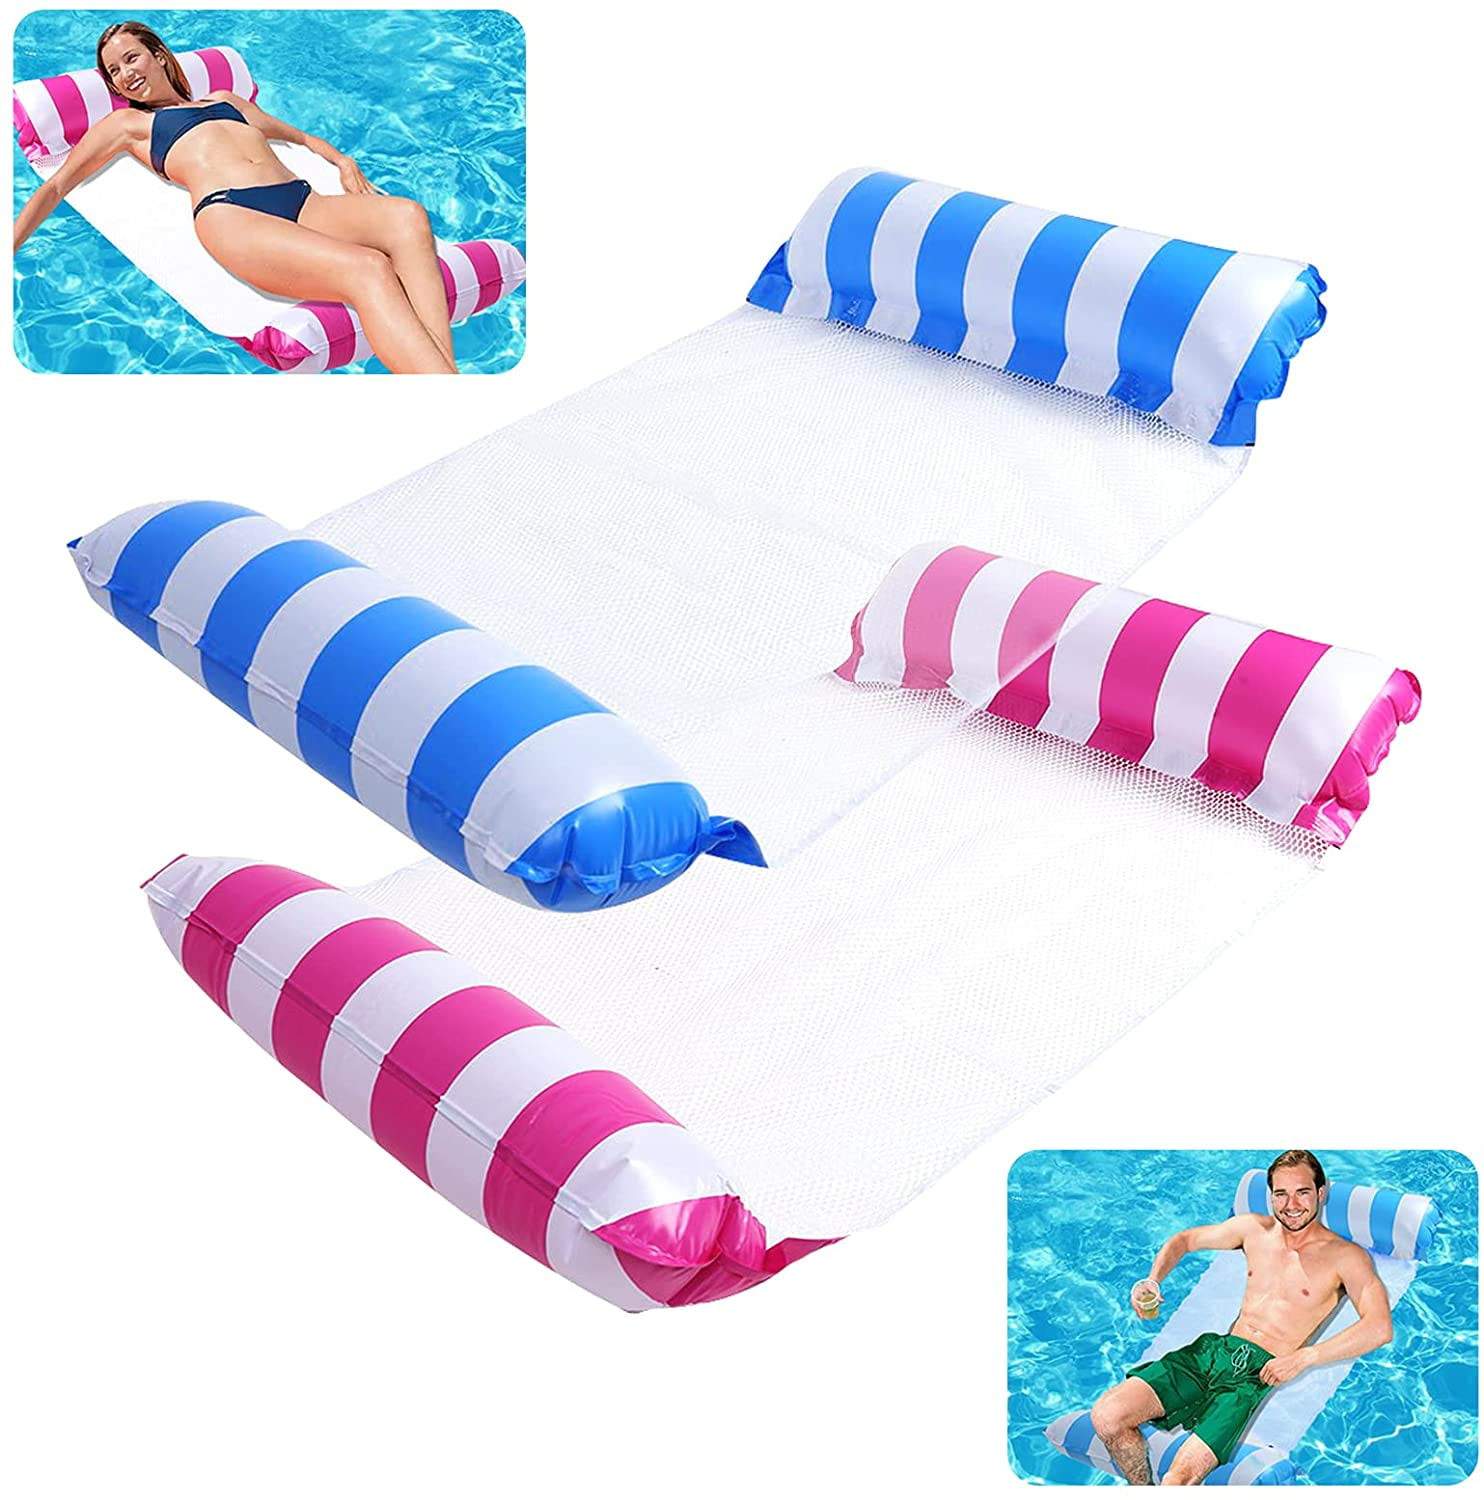 Details about   Pool Float Inflatable Lounger Chair Lounge Mattress 